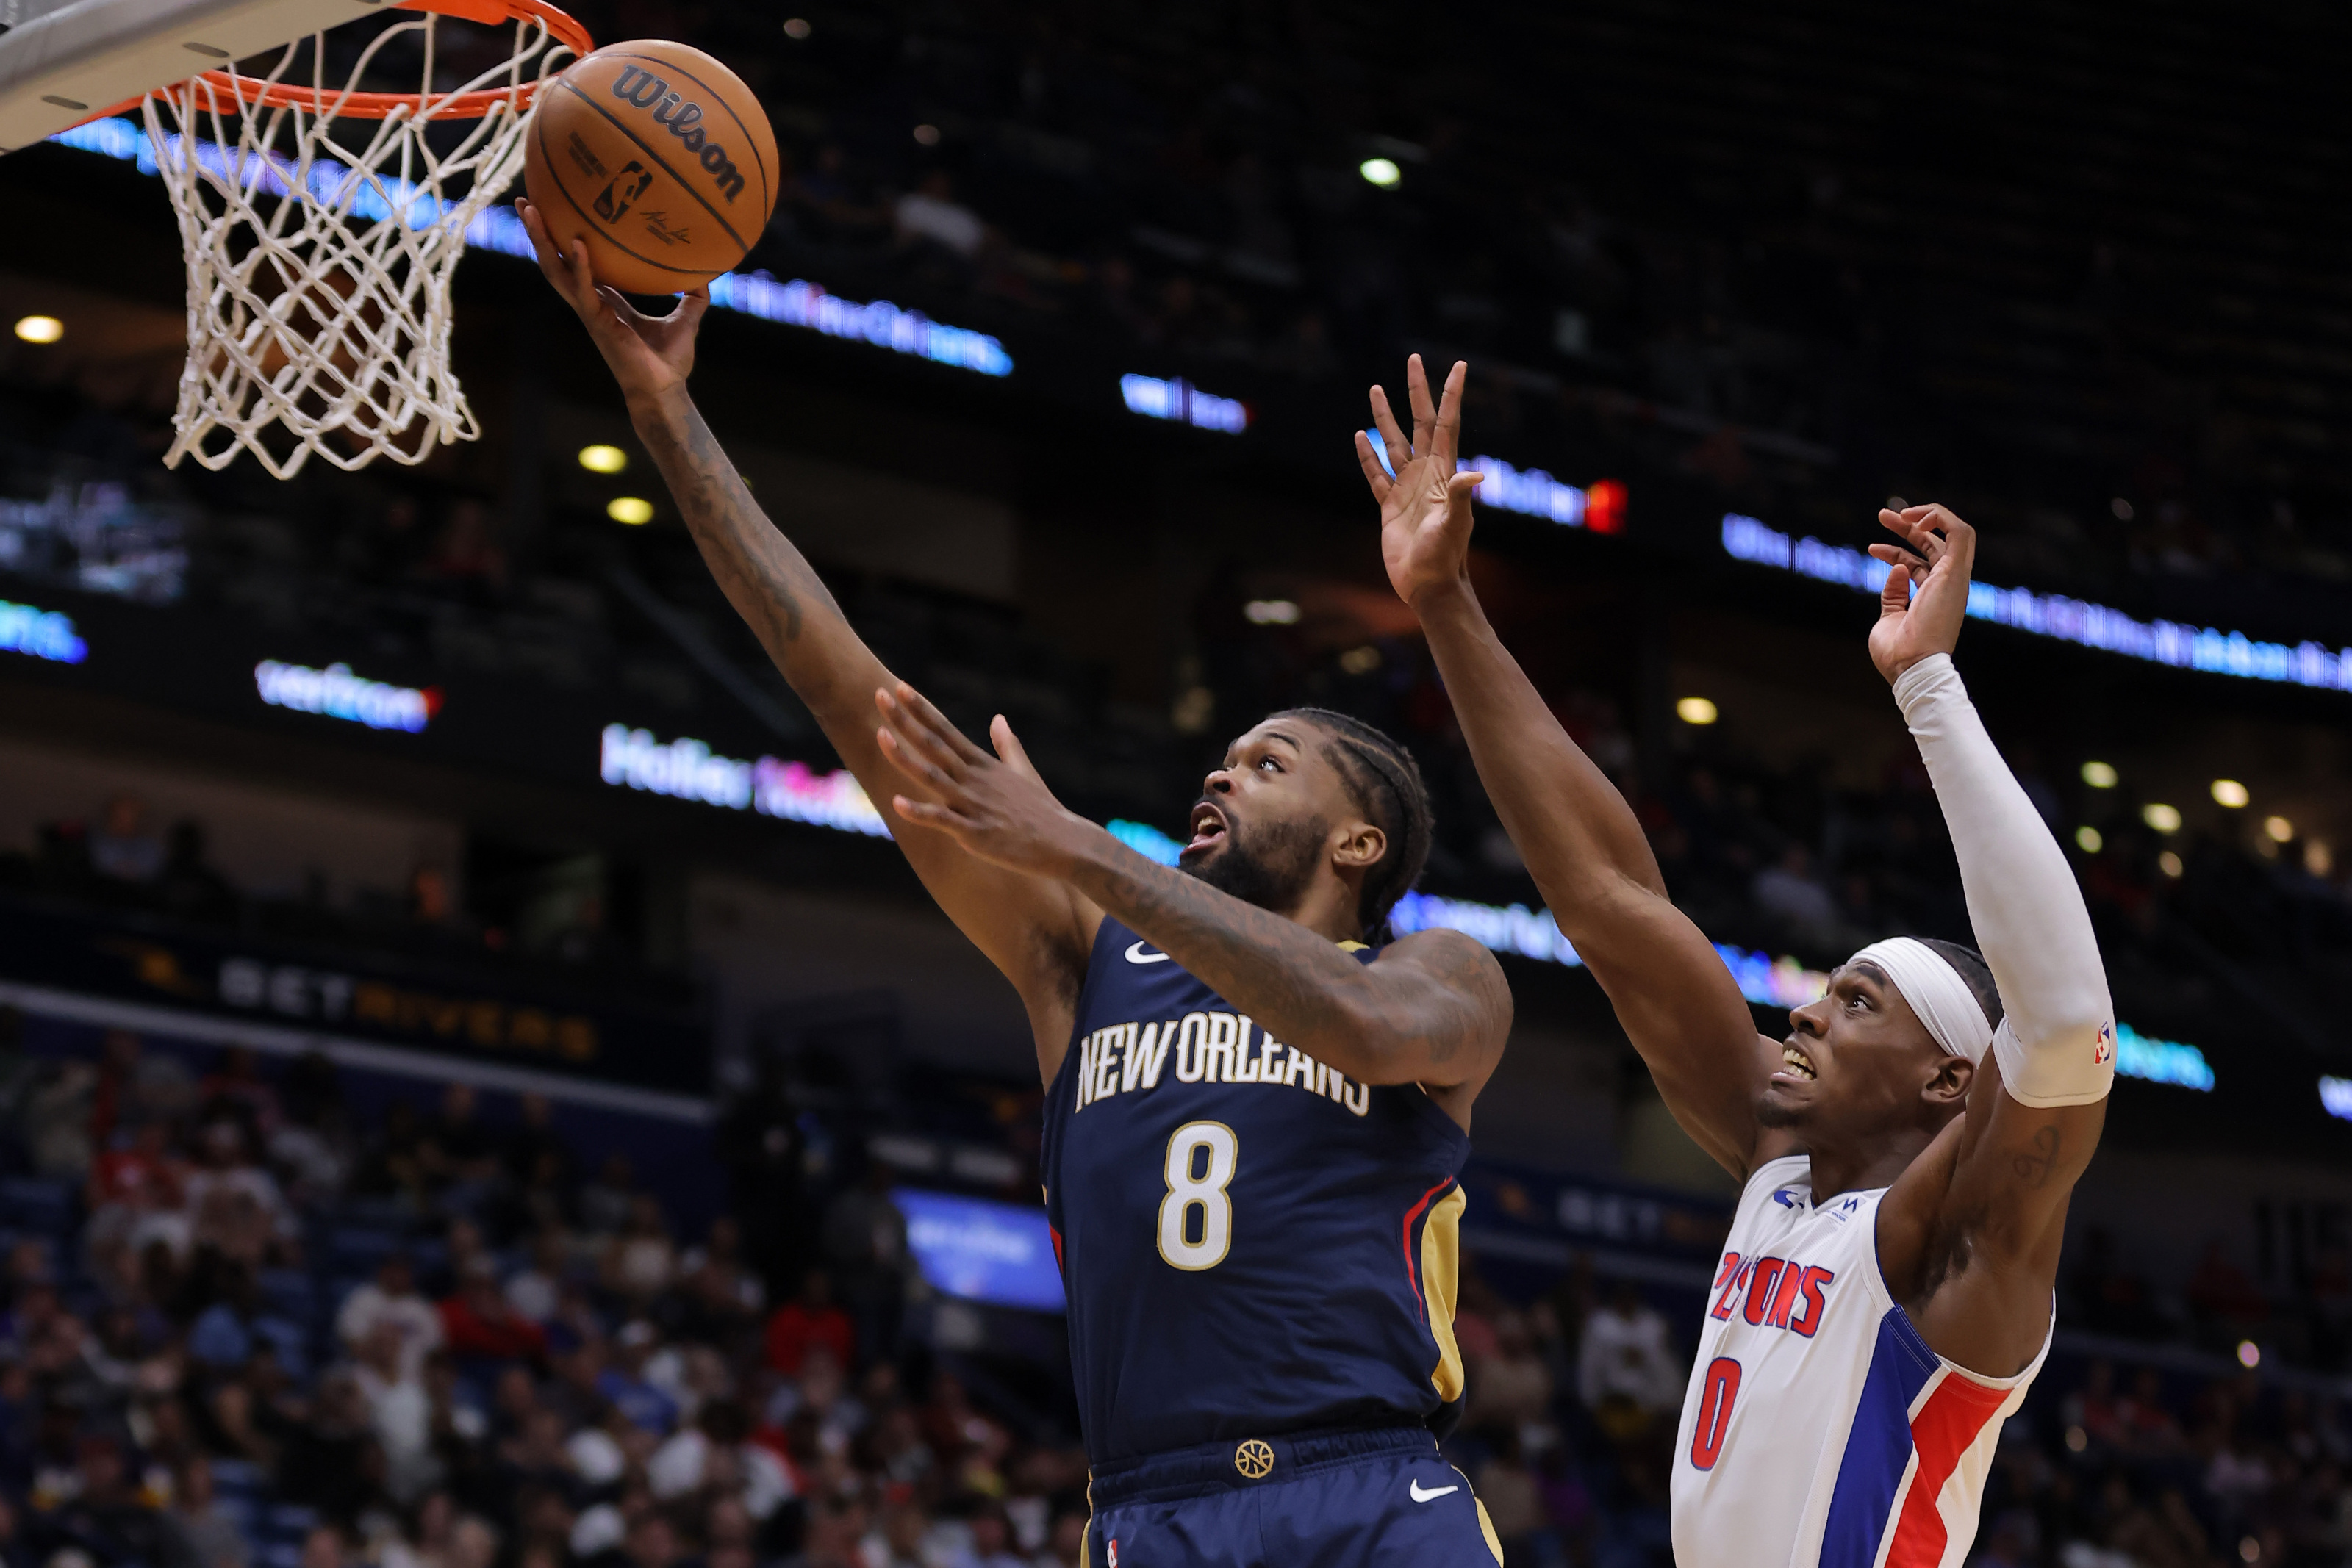 New Orleans Pelicans: 30 greatest players in franchise history